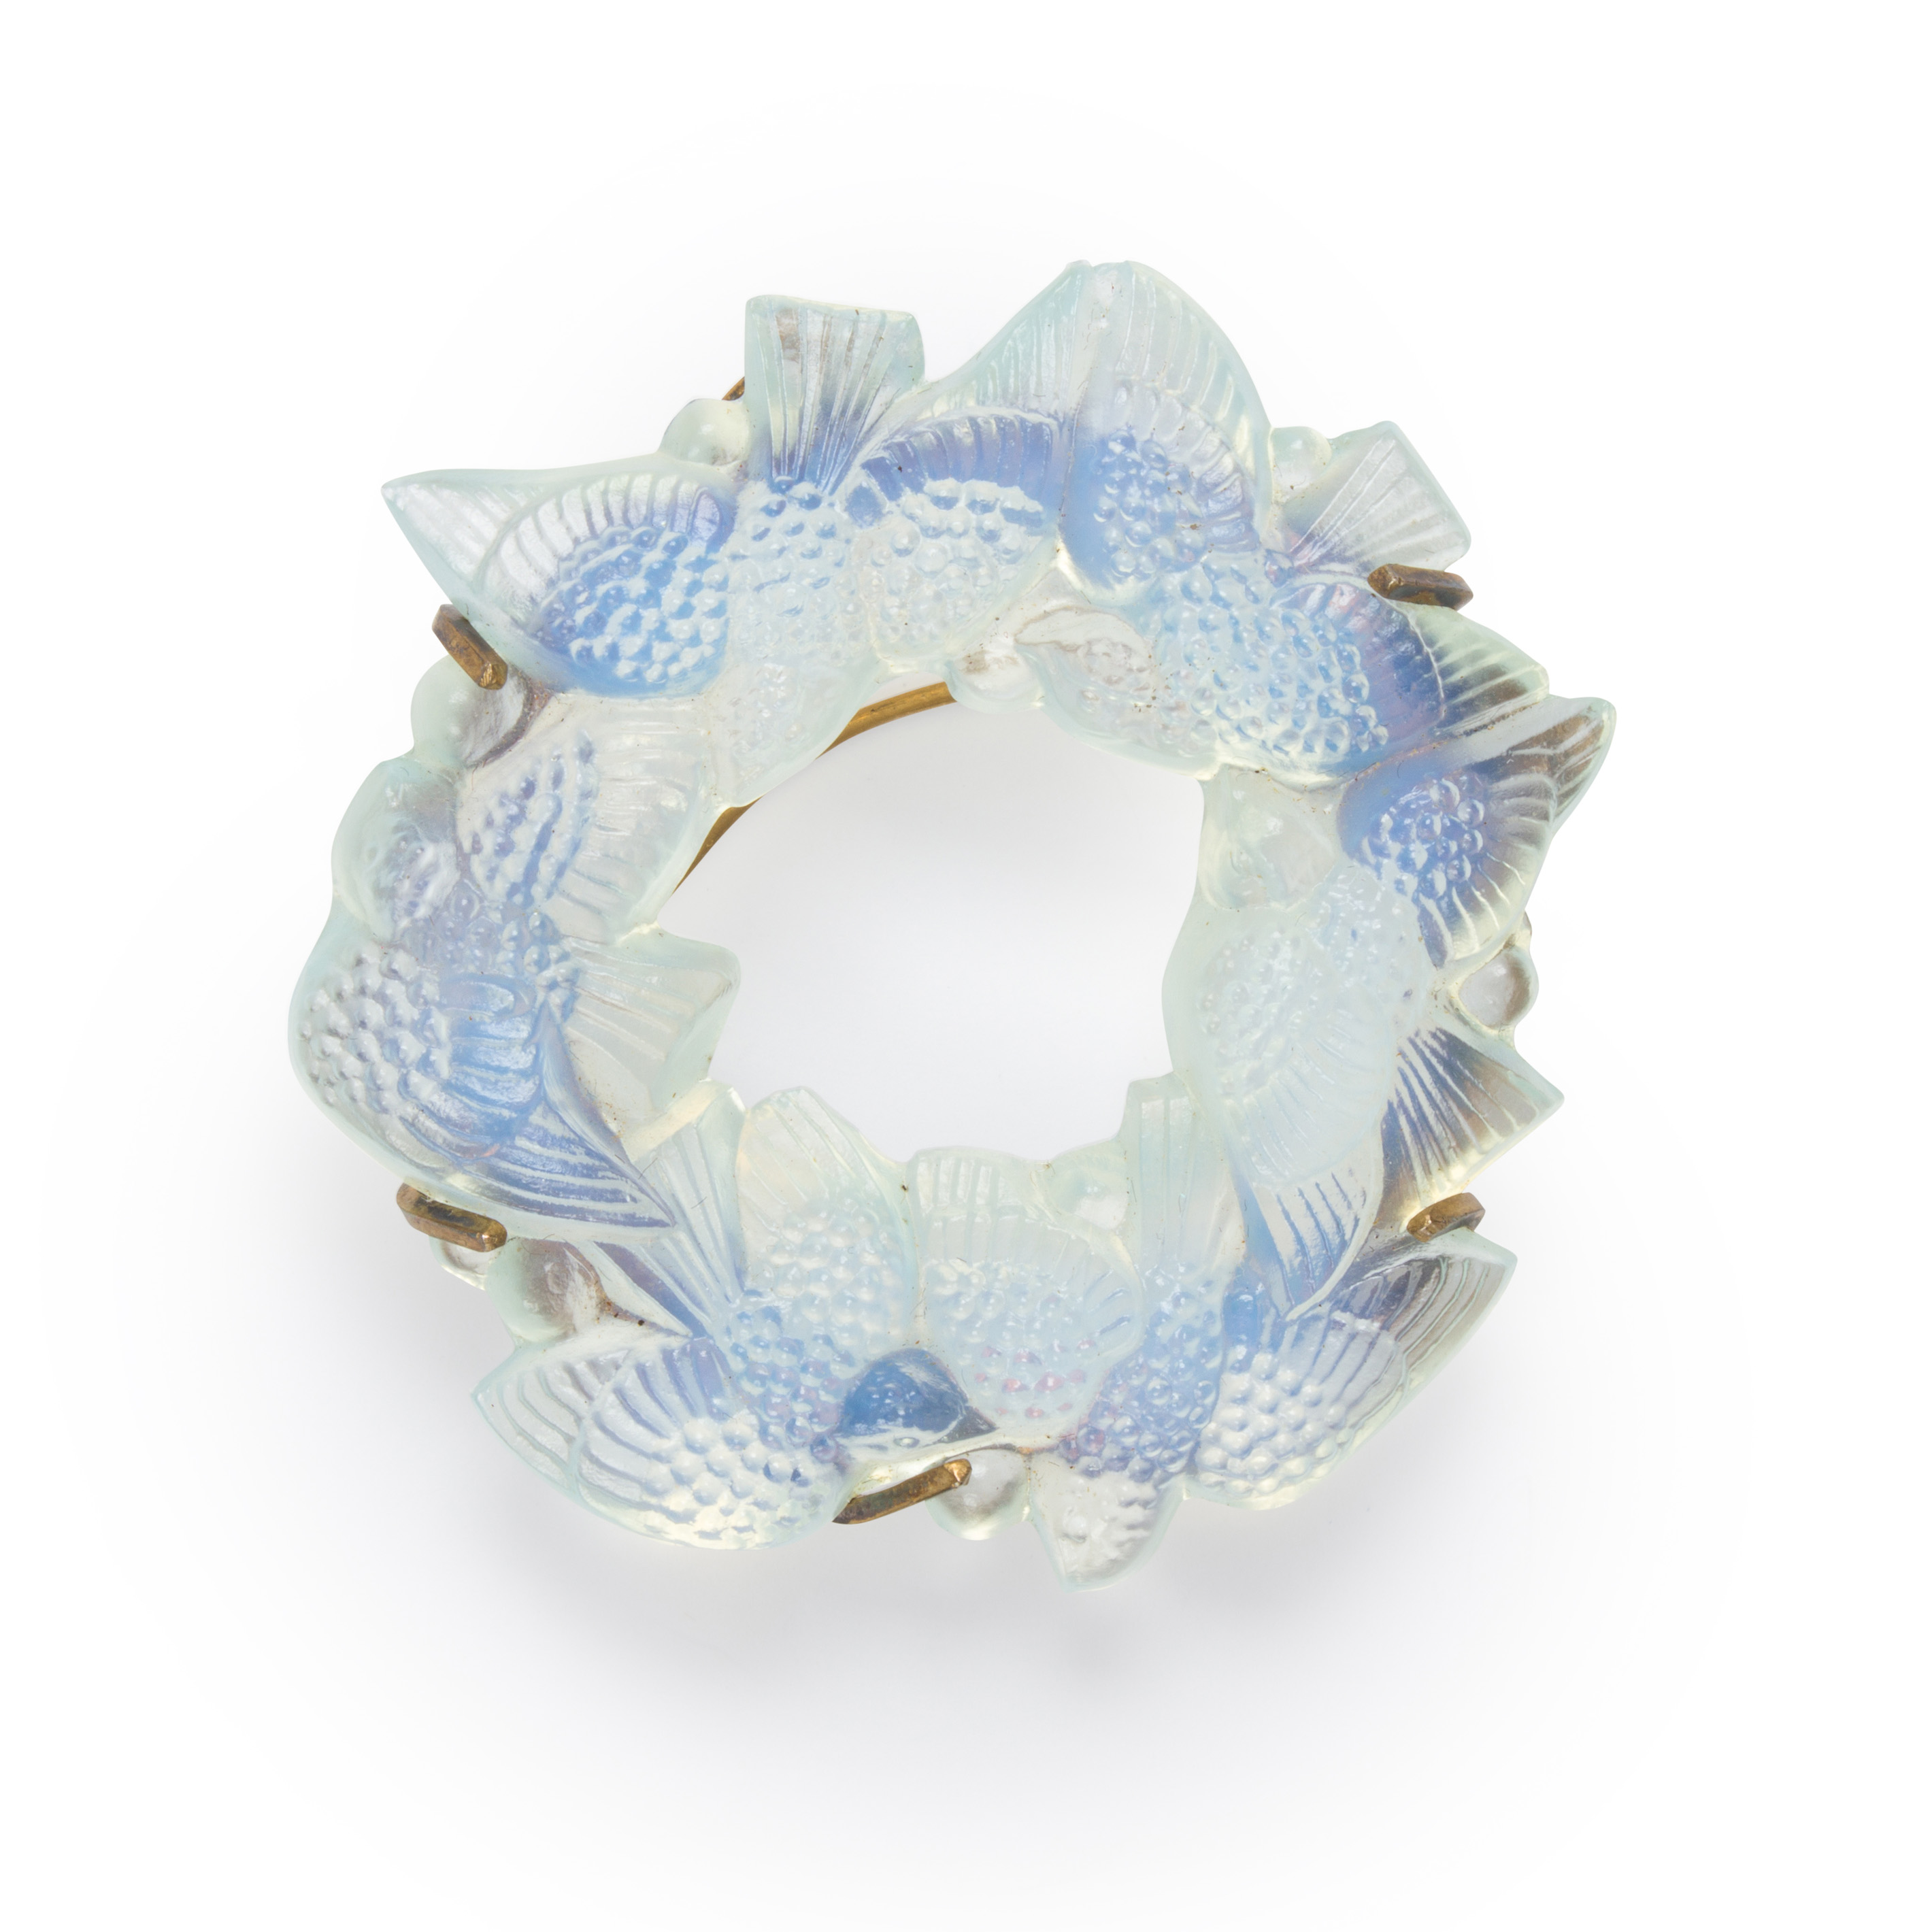 A GLASS BROOCH, LALIQUE A glass